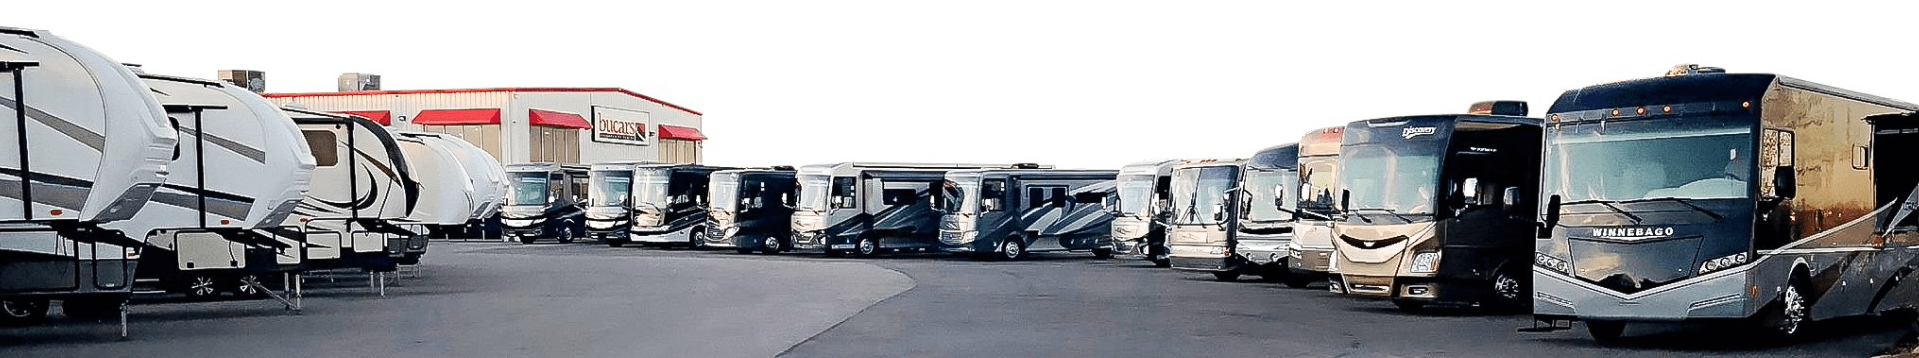 Bucars RV Centre carries a full range of motorized and towable RVs.